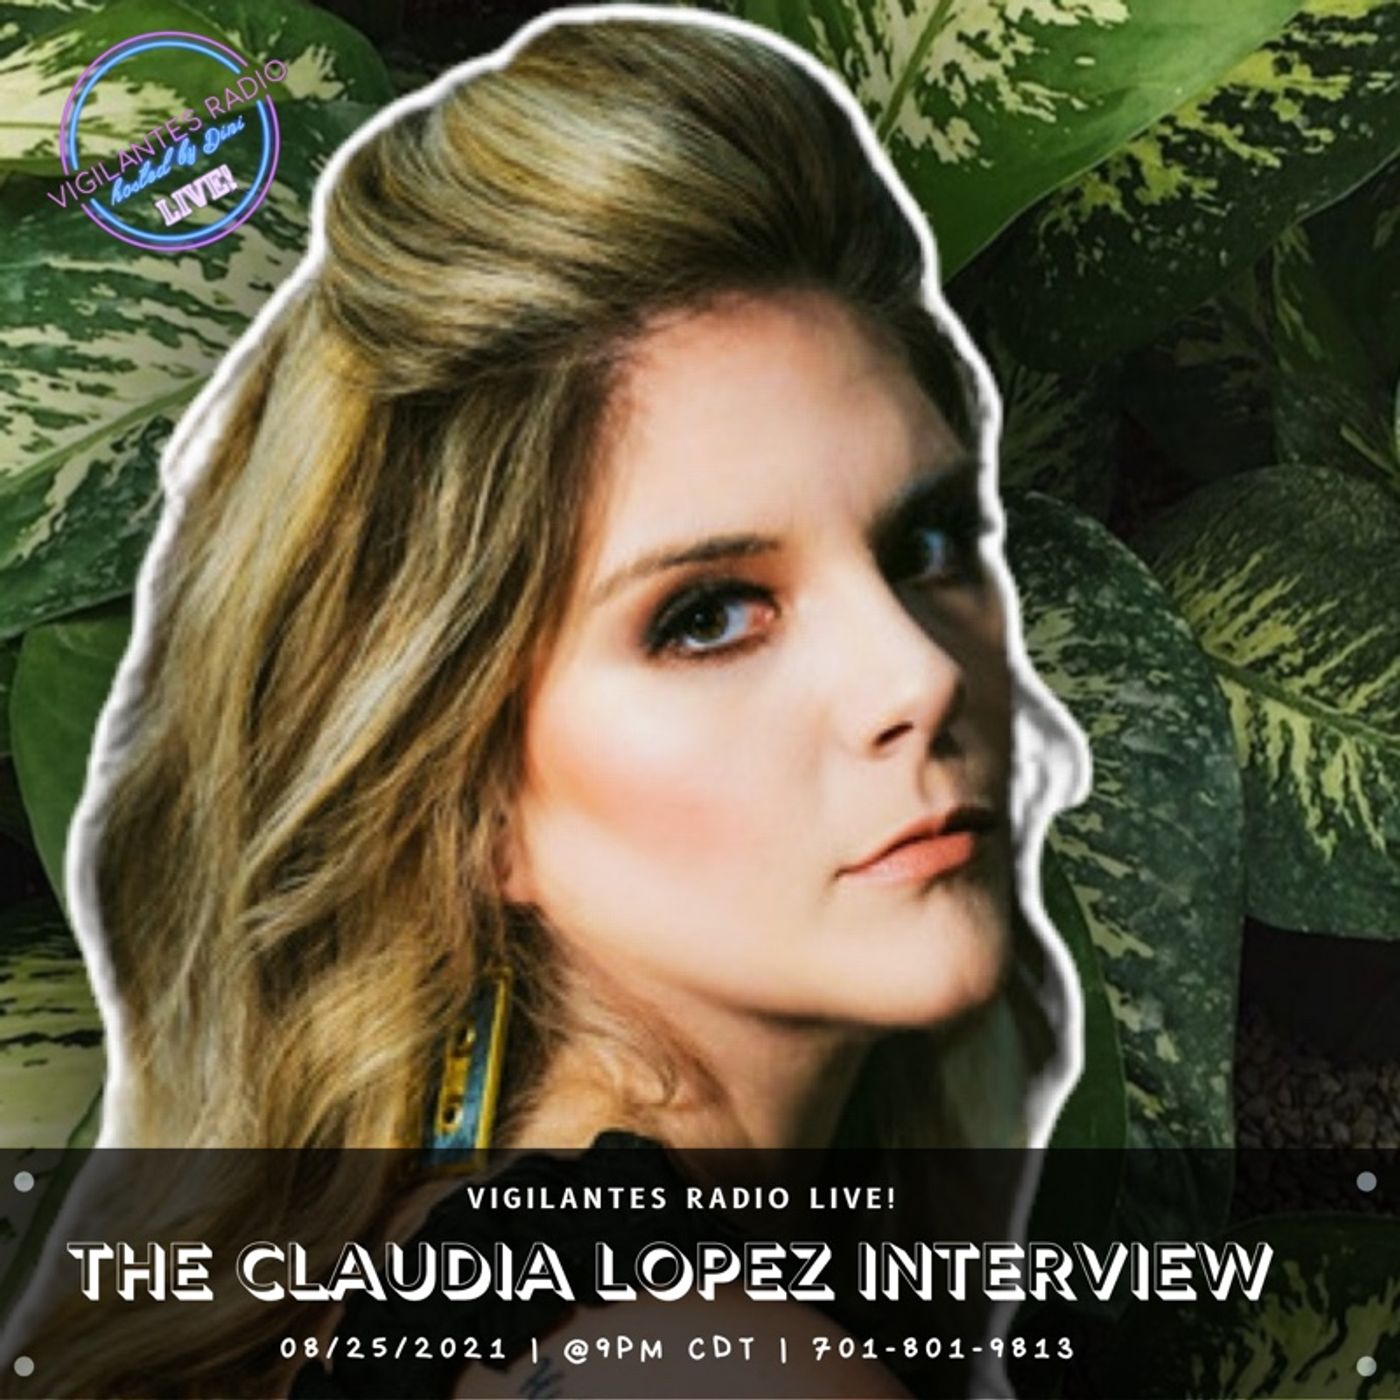 The Claudia Lopez Interview. Image